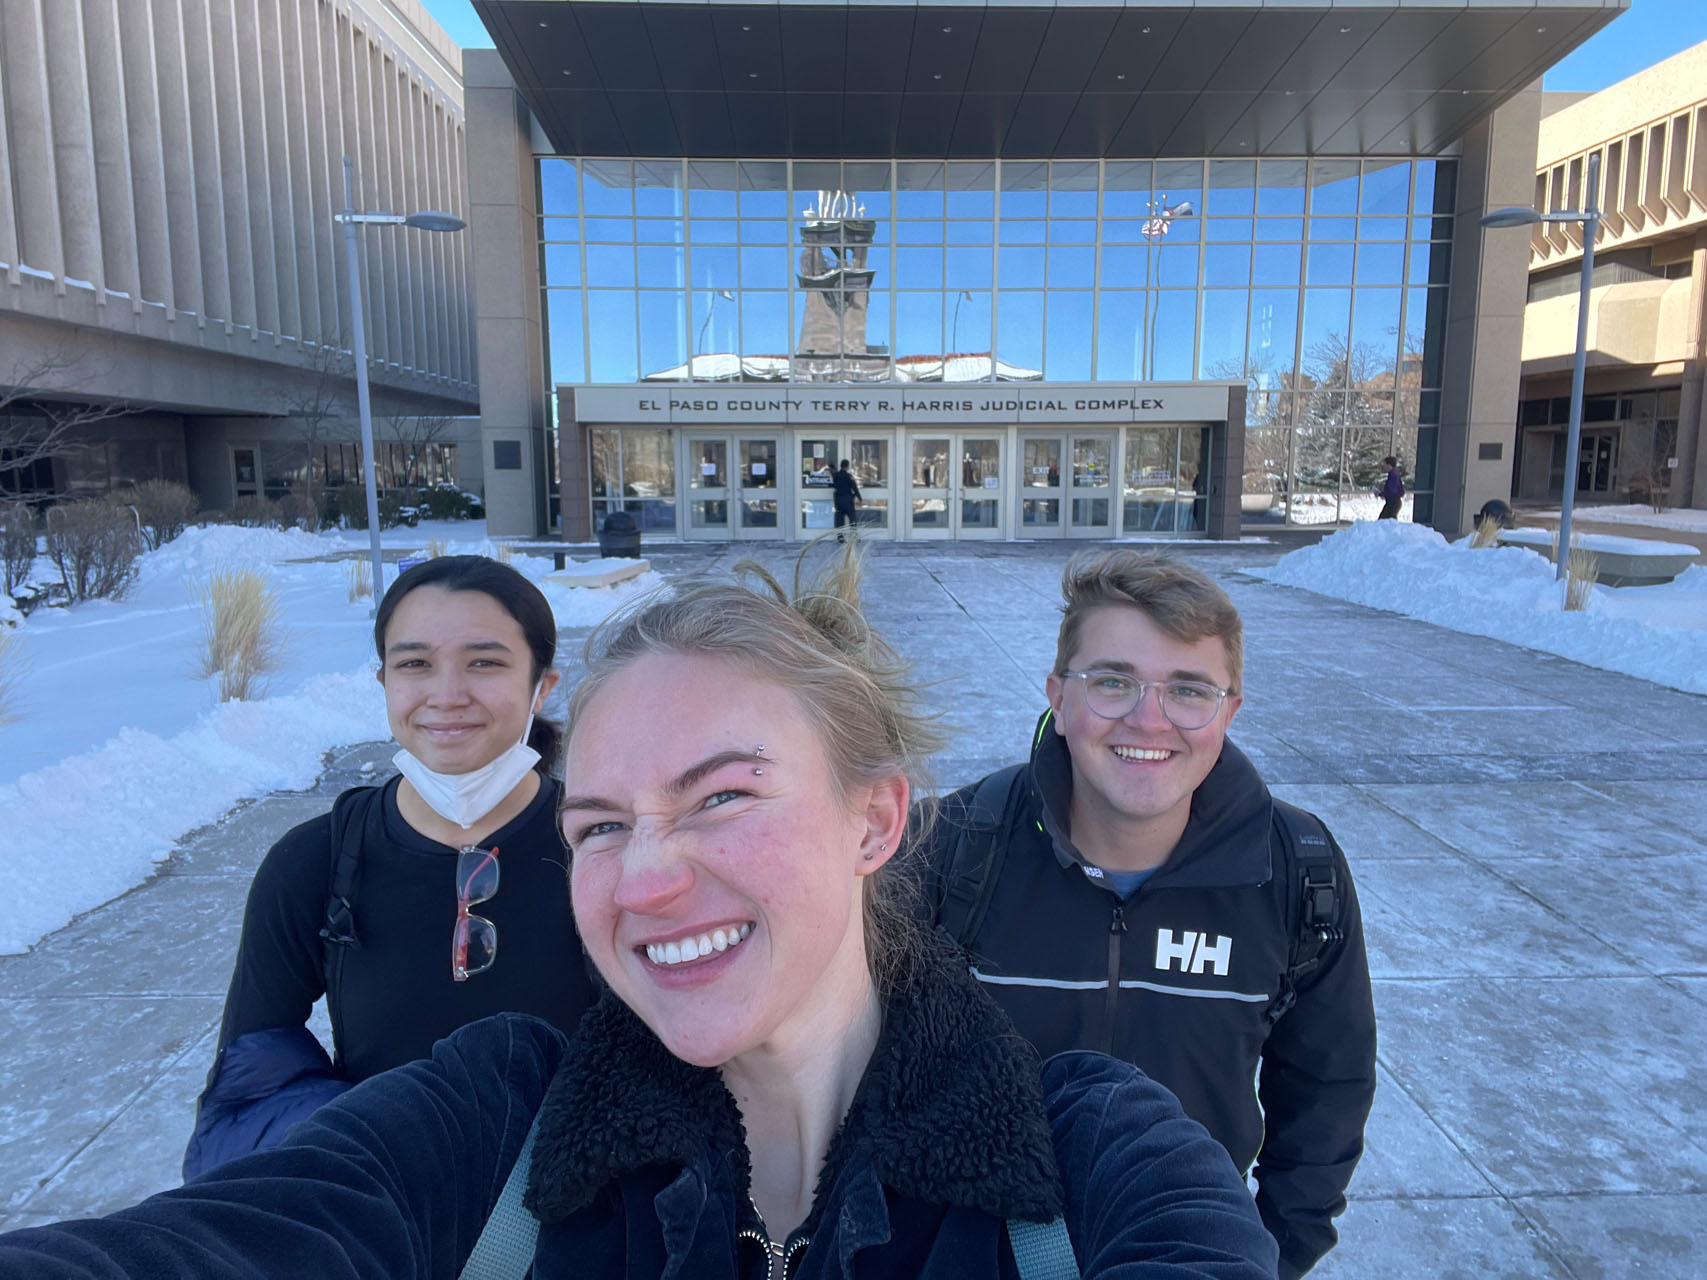 Isabelle Wangevoord ’25, Emma Fowkes '24, and Koray Gates '25 are pictured on Feb. 4, 2022, during one of the first trips the co-chairs took to the courthouse prior to taking groups of club members. Photo submitted by Koray Gates '25.